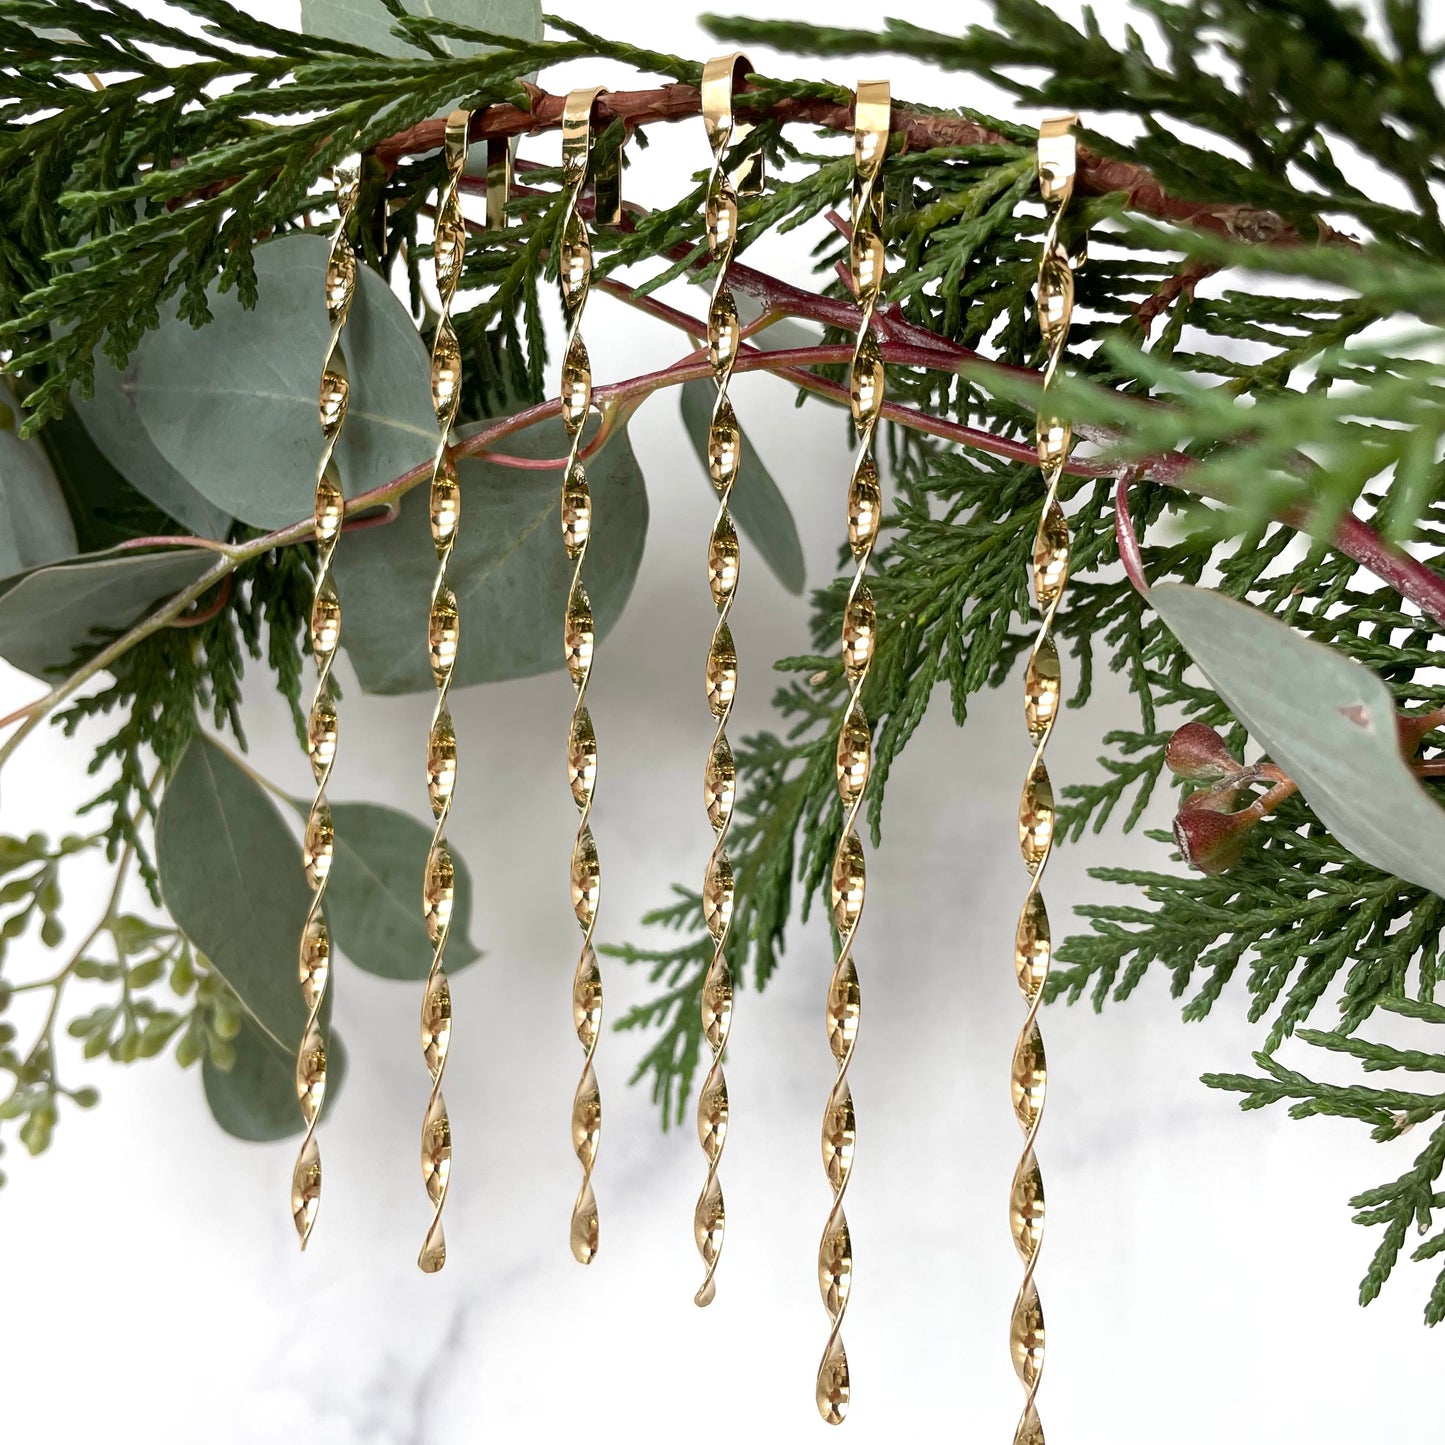 six gold plated christmas tree ornaments displayed on greenery with a white background